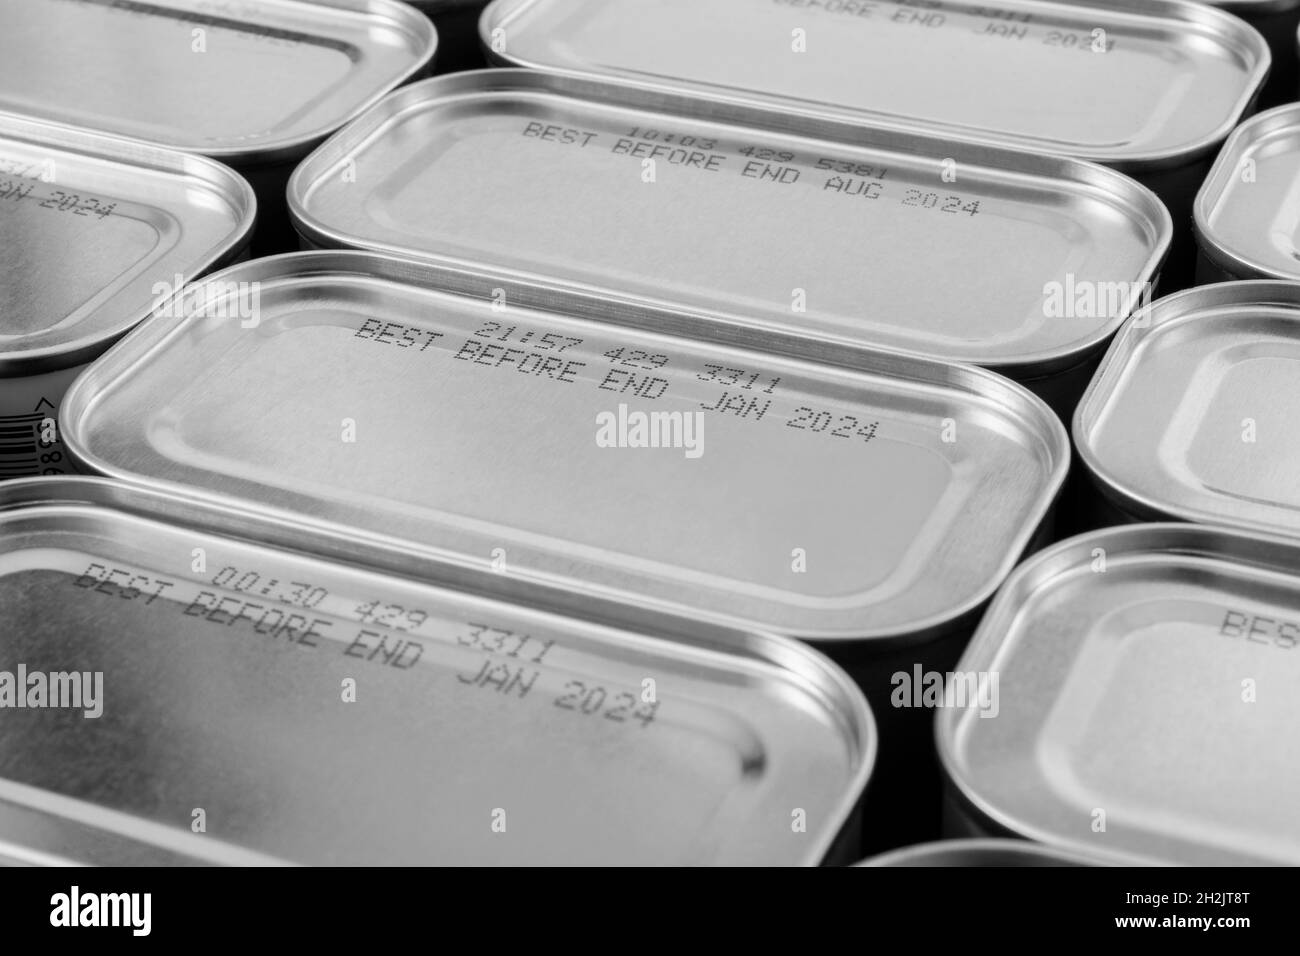 Monochrome abstract metal tin food cans with part of food Best Before Date. For food preservation, pandemic food shortages in UK, lockdown hoarding. Stock Photo